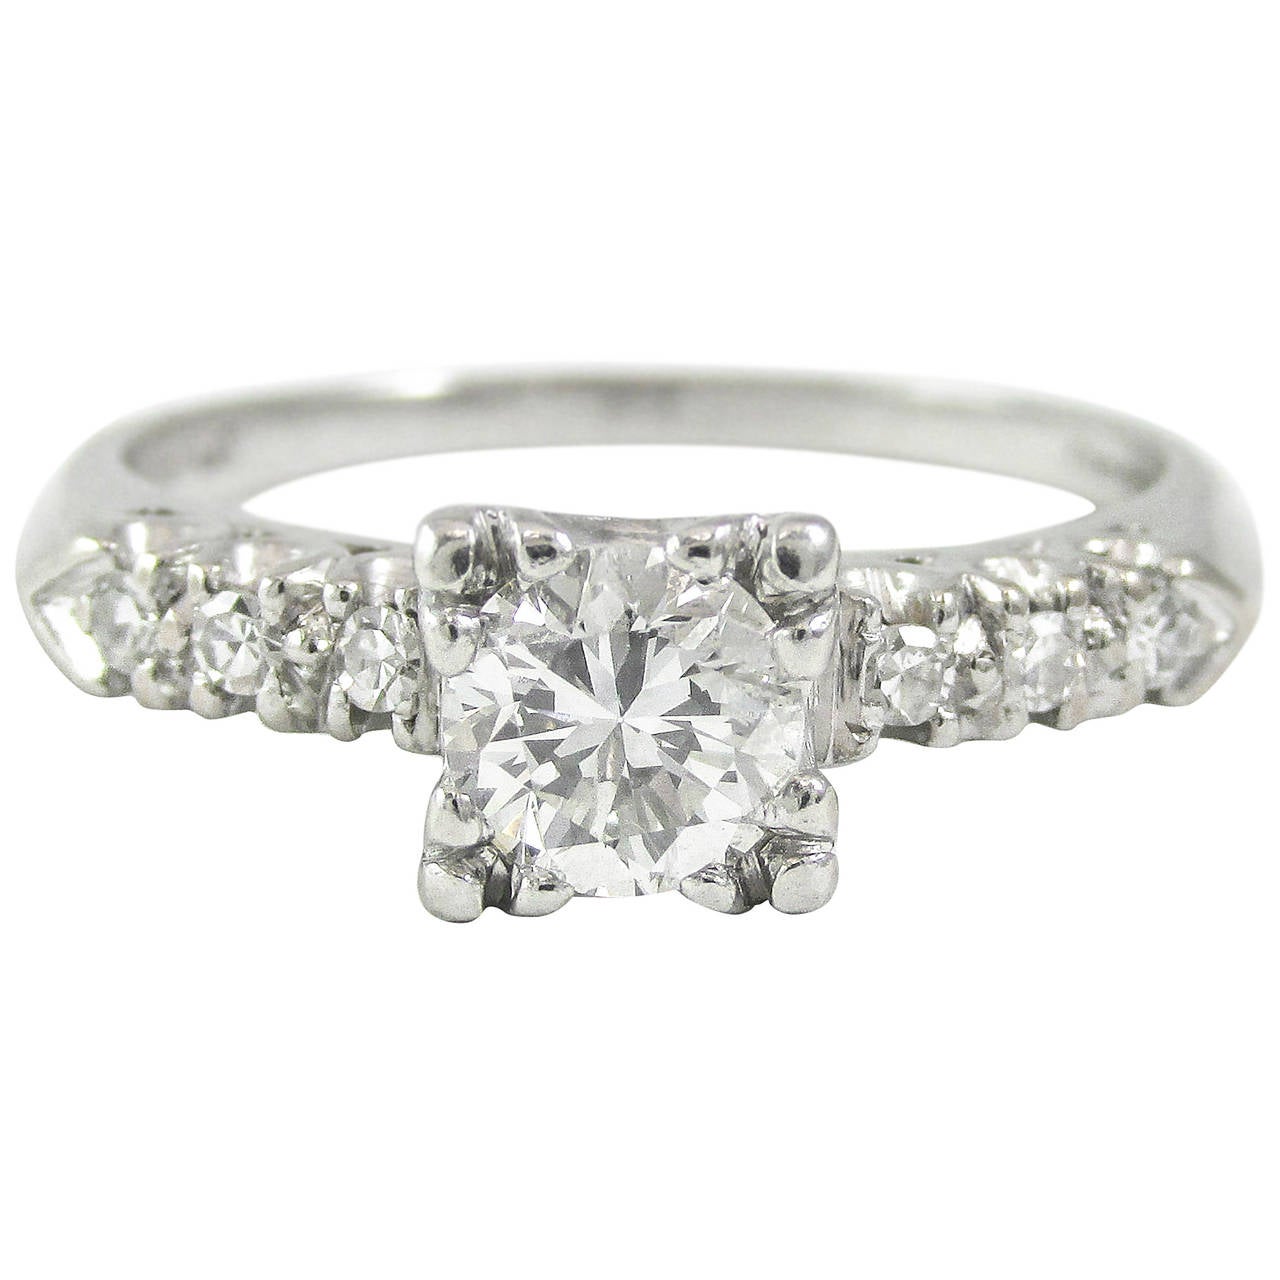 This wonderful diamond solitaire ring is set with a center transitional cut diamond weighing approximately 0.60 Carats. The diamond is set in a platinum mounting with finely detailed “fishtail“ prongs and 3 diamonds set along either side. The center